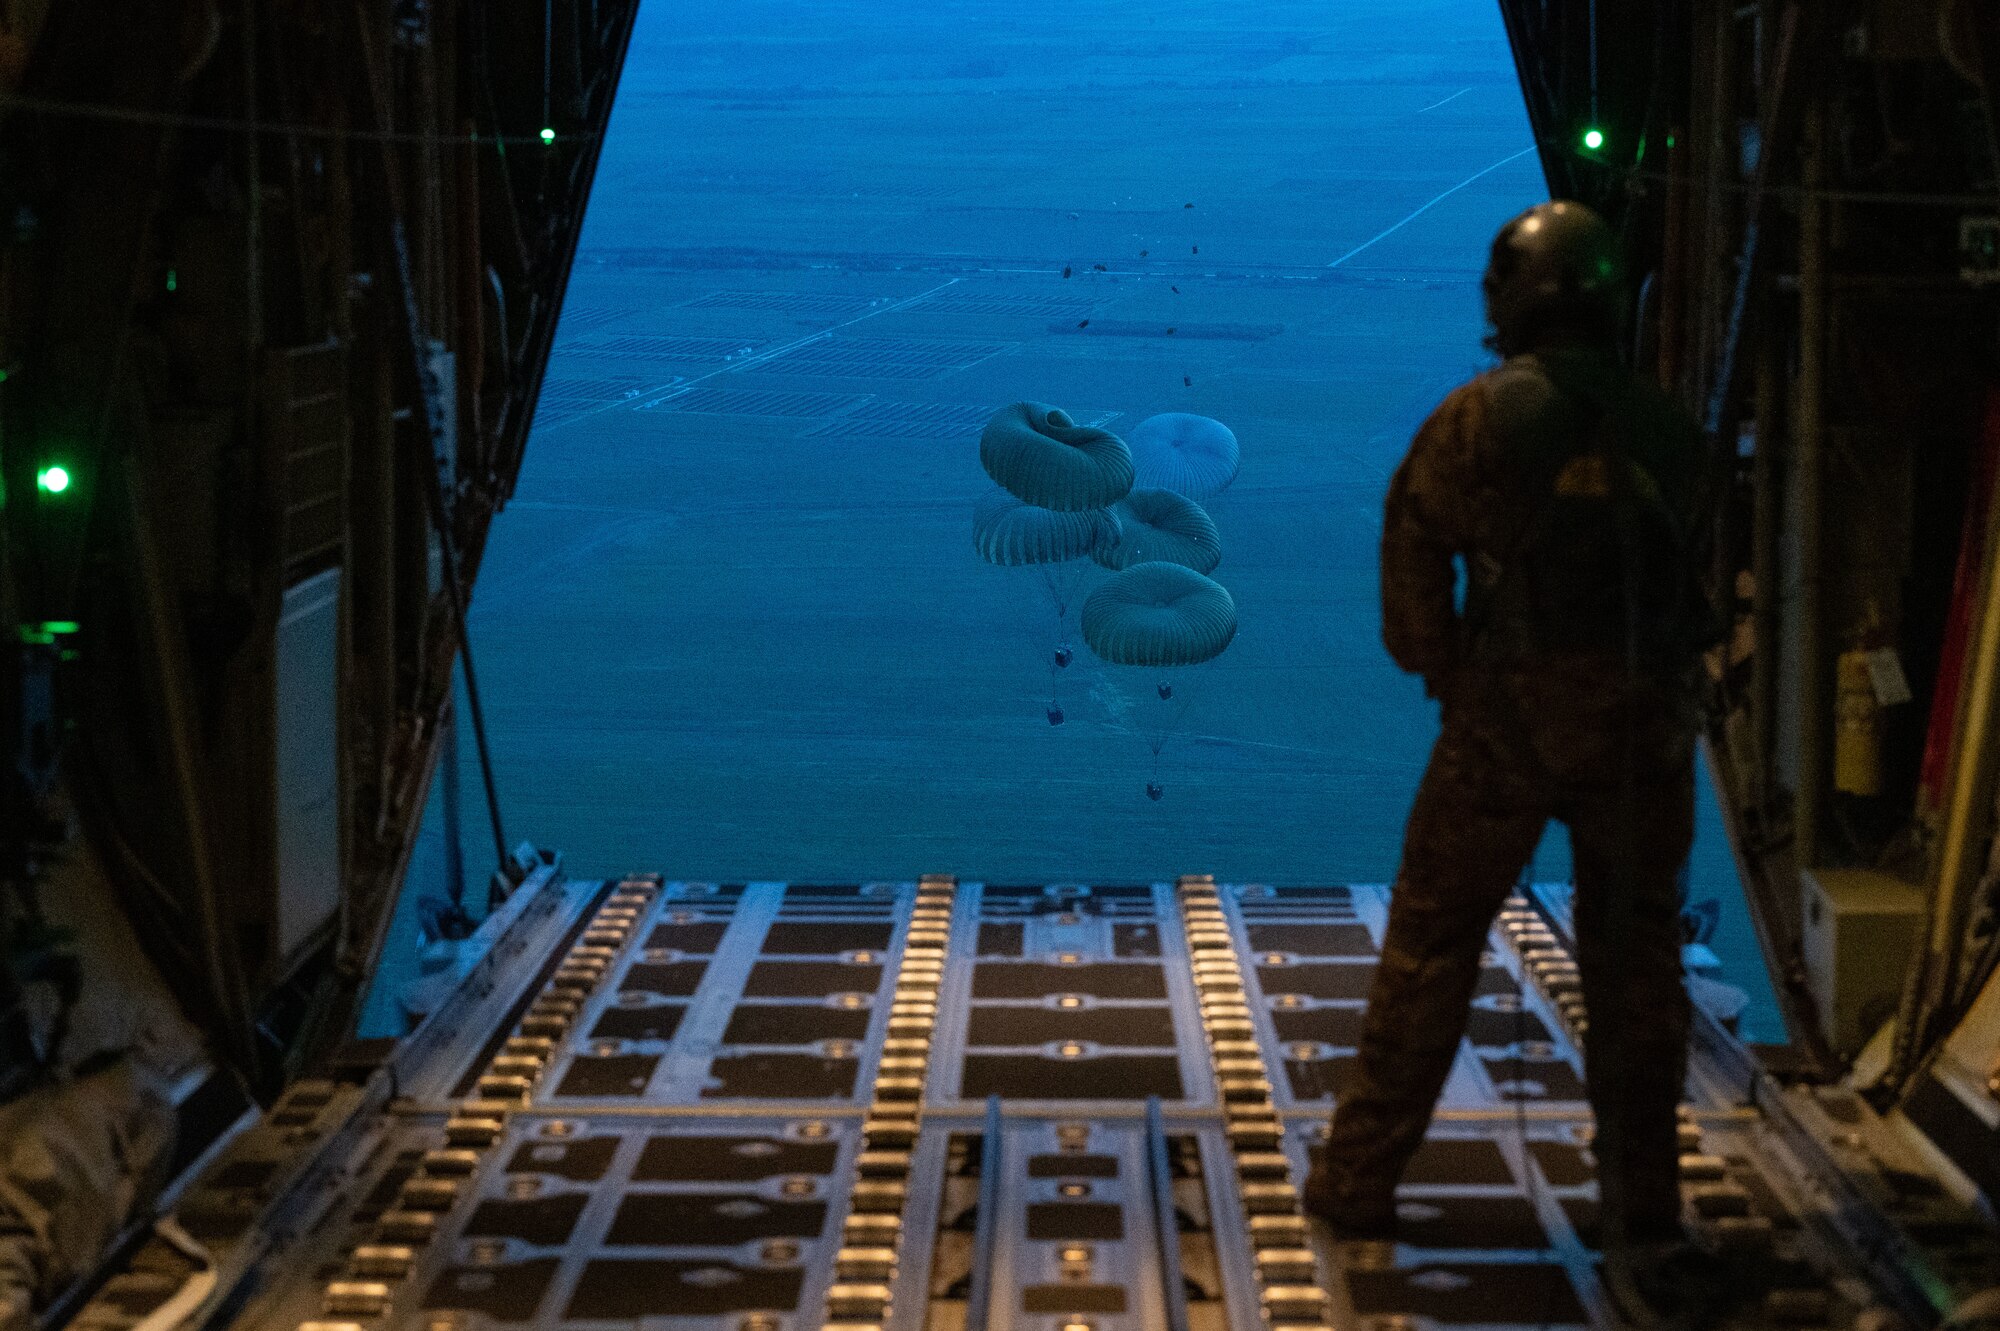 a person stands on the ramp watching cargo parachute down to the grounde